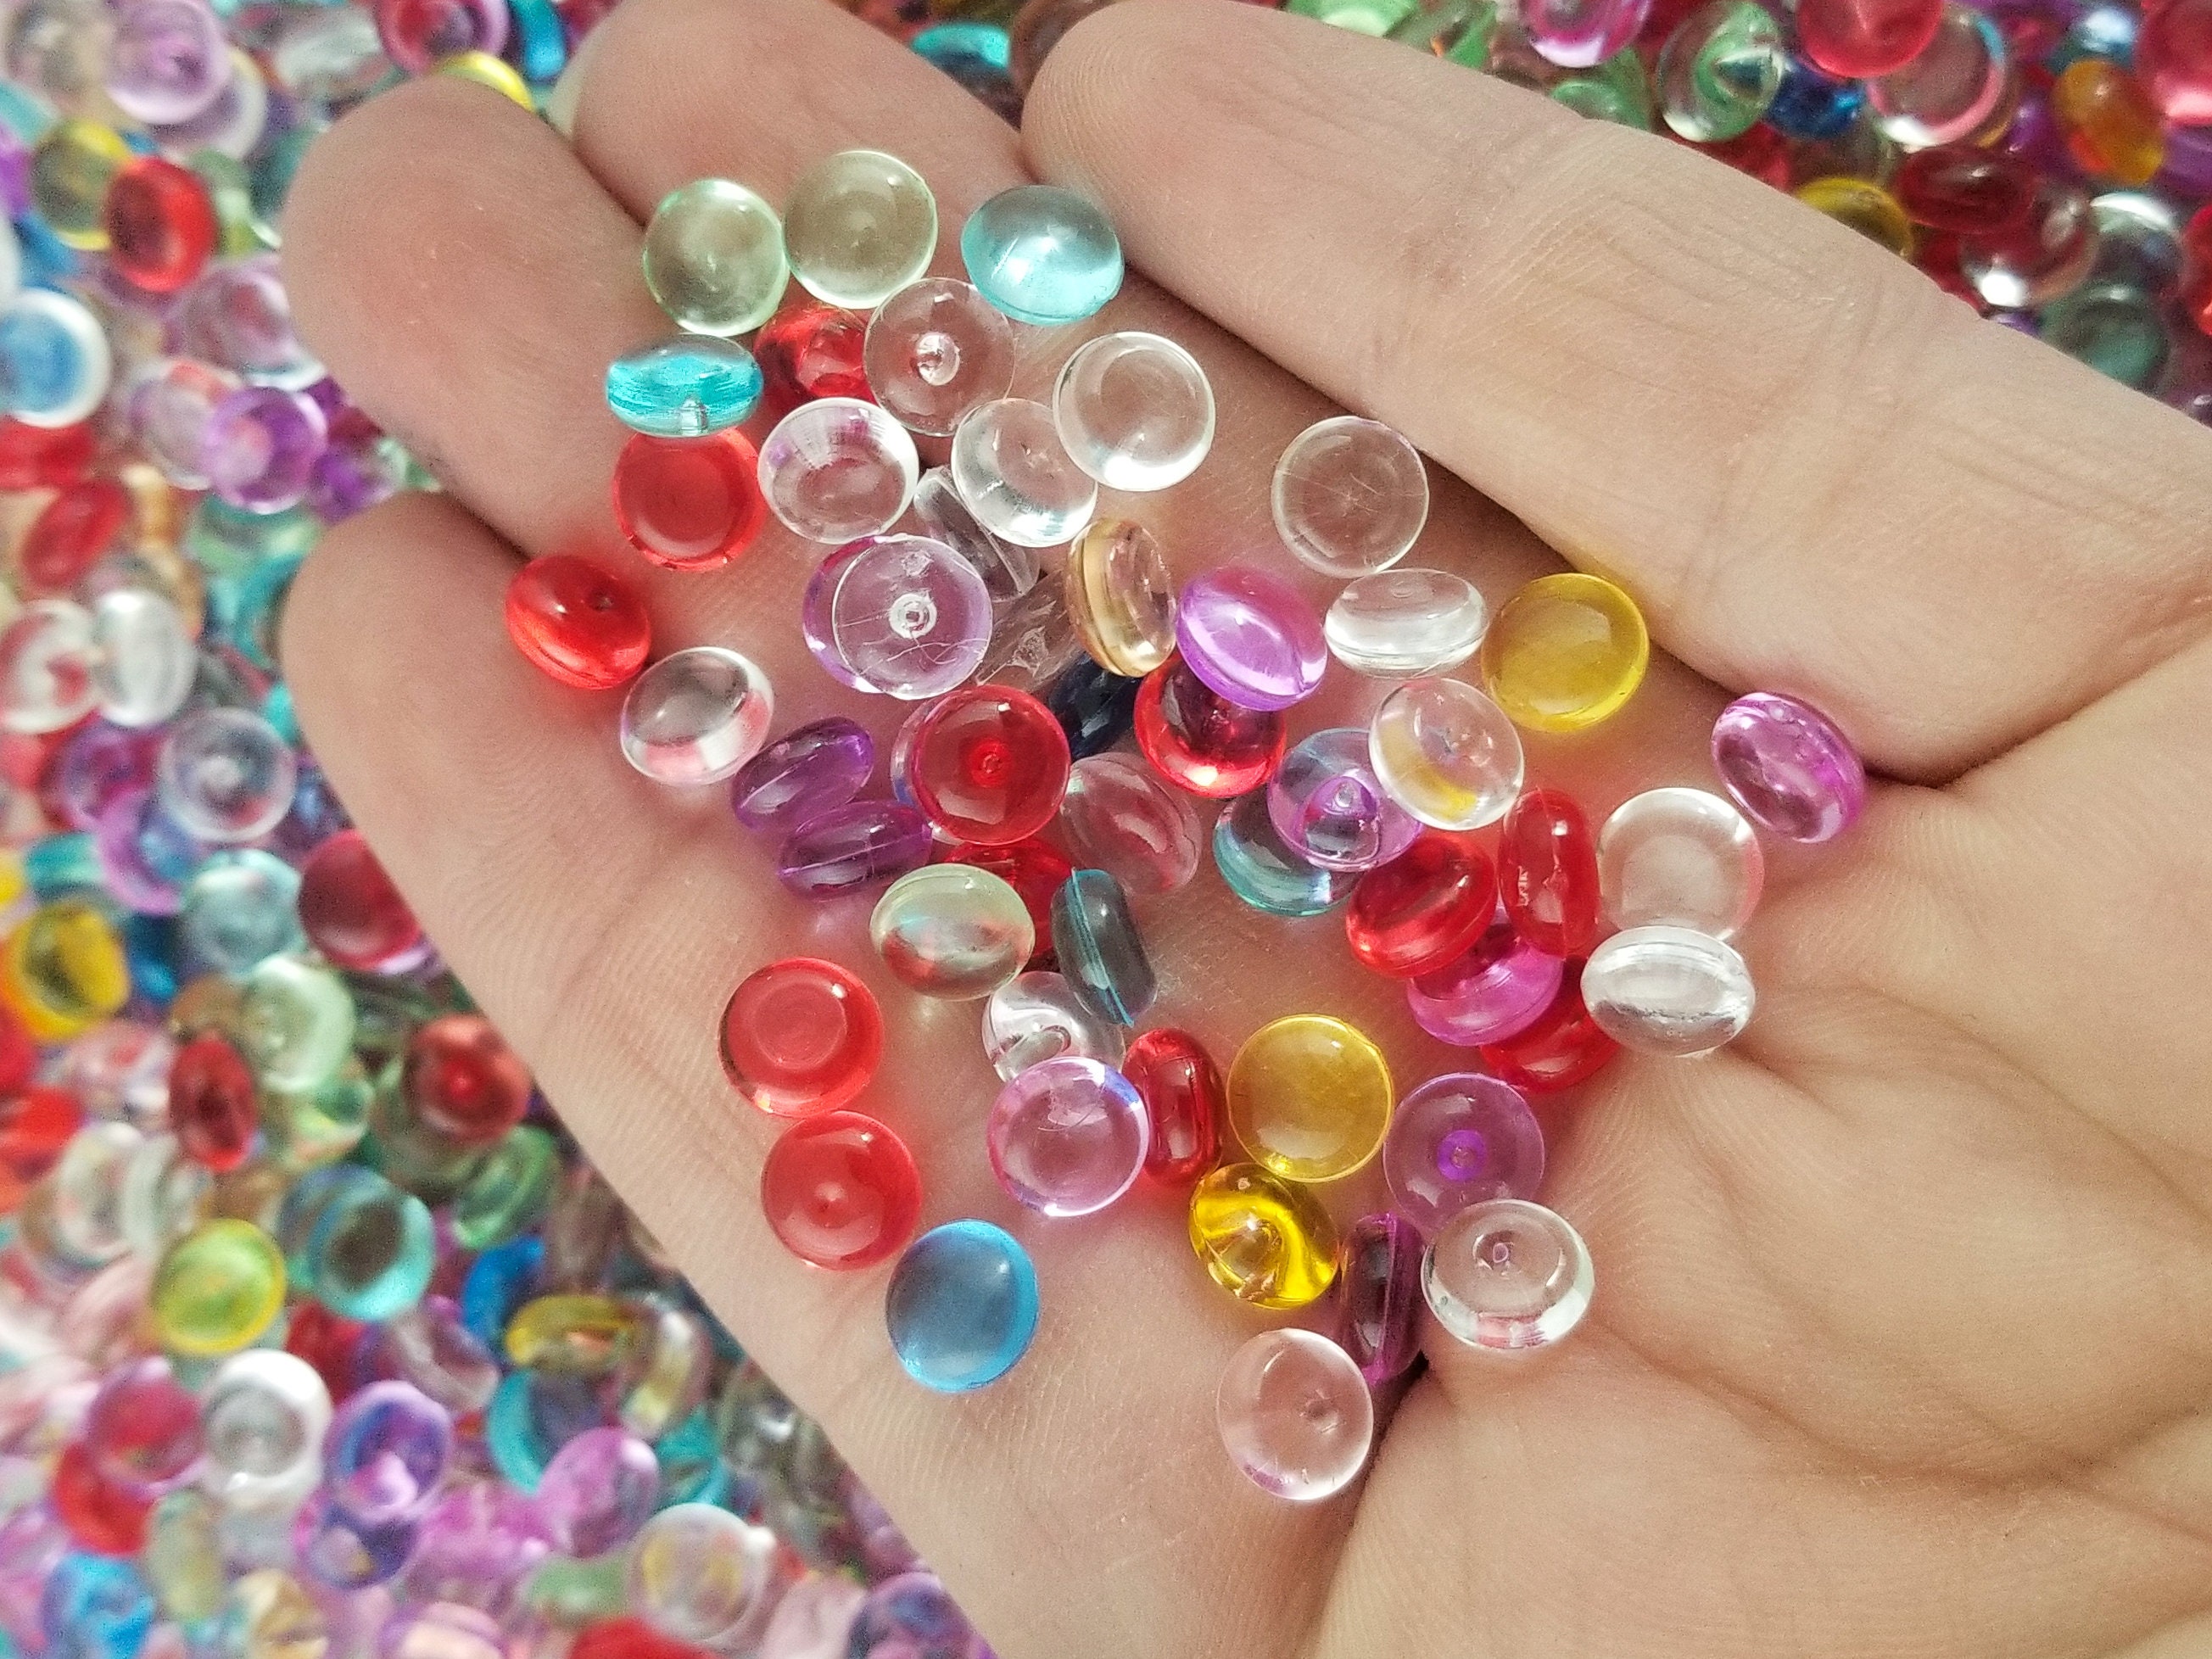 100 Gram 3 1/2 Ounces Multicolor Fishbowl Slushie Beads for Crunchy Slime  and Crafting 